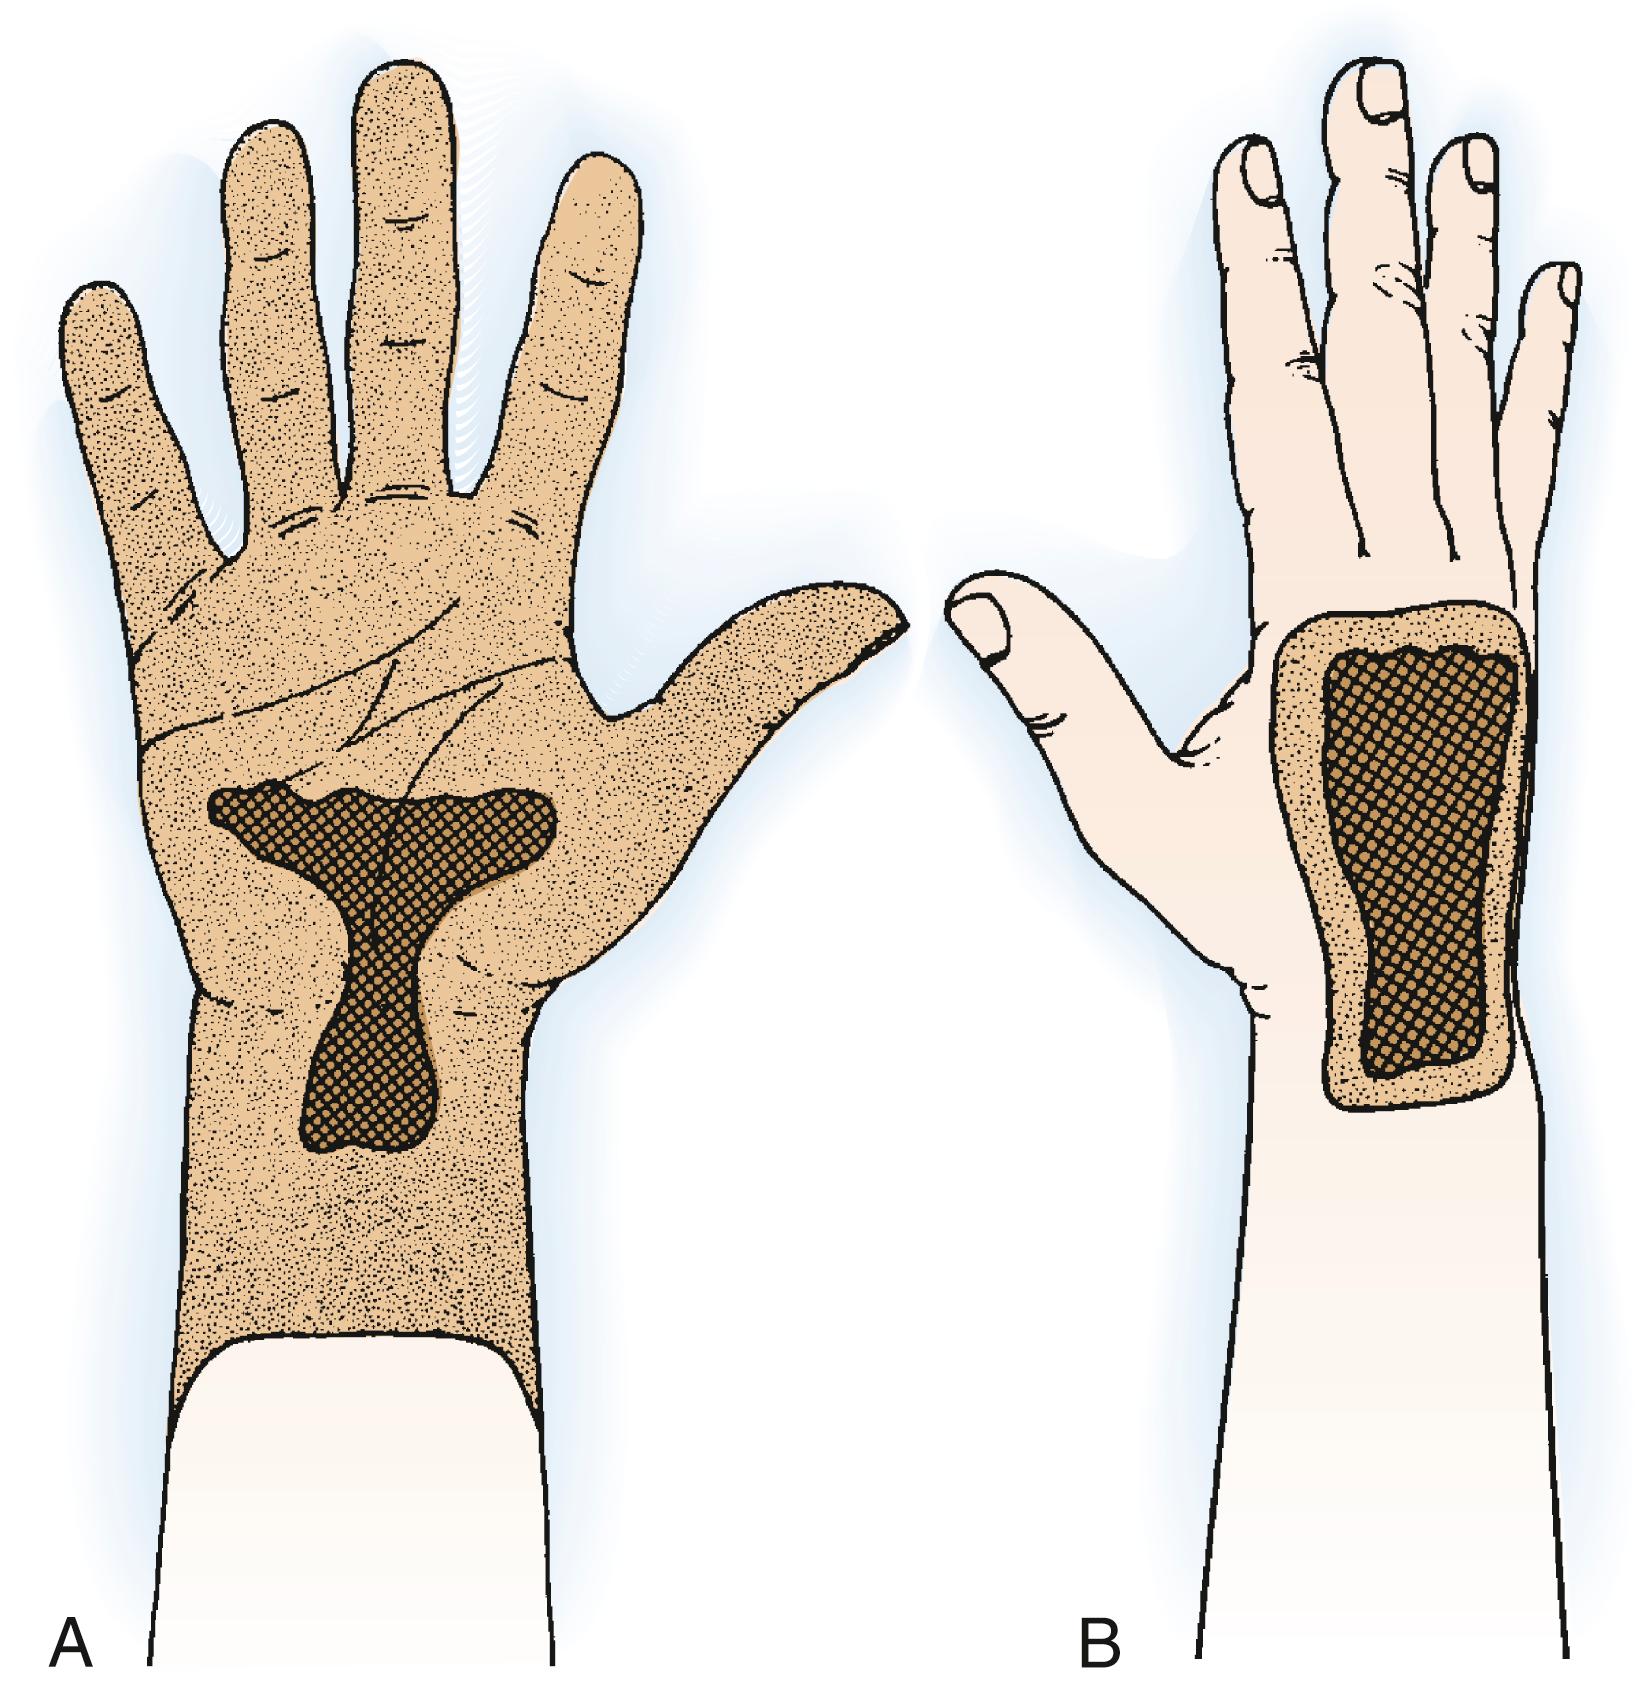 Fig. 59.11, A, Tumors on the proximal volar aspect of the palm often involve the flexor tendons and median and ulnar nerves; forearm- or wrist-level amputation is usually required. B, Lesions on the dorsum of the hand may not necessarily invade vital neurovascular structures and can be adequately resected en bloc, followed by secondary reconstruction.